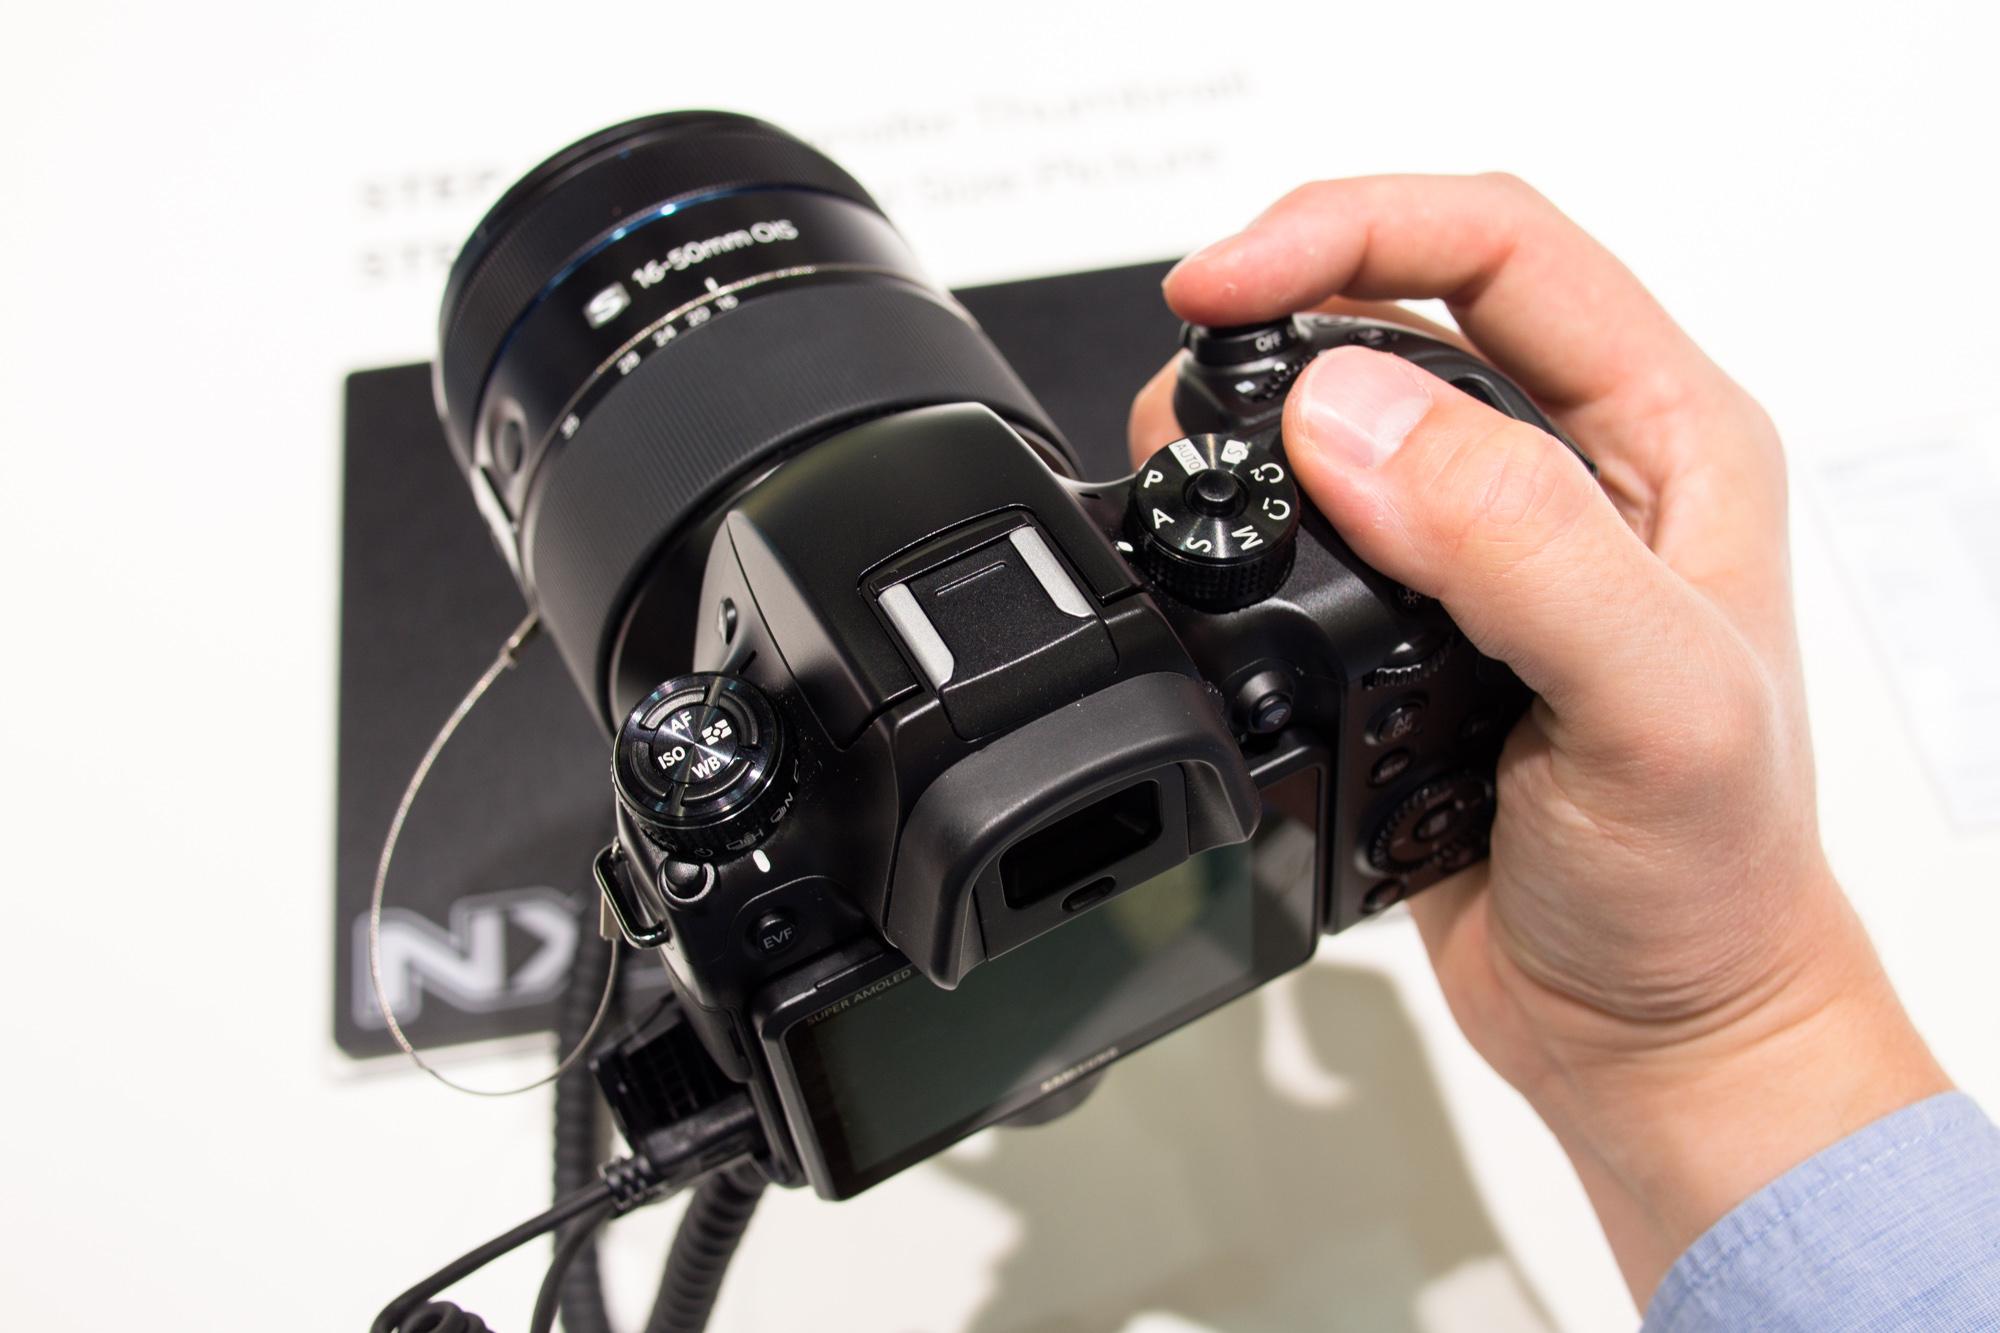 samsungs nx1 4k shooting beast puts mirrorless competition shame samsung in hand